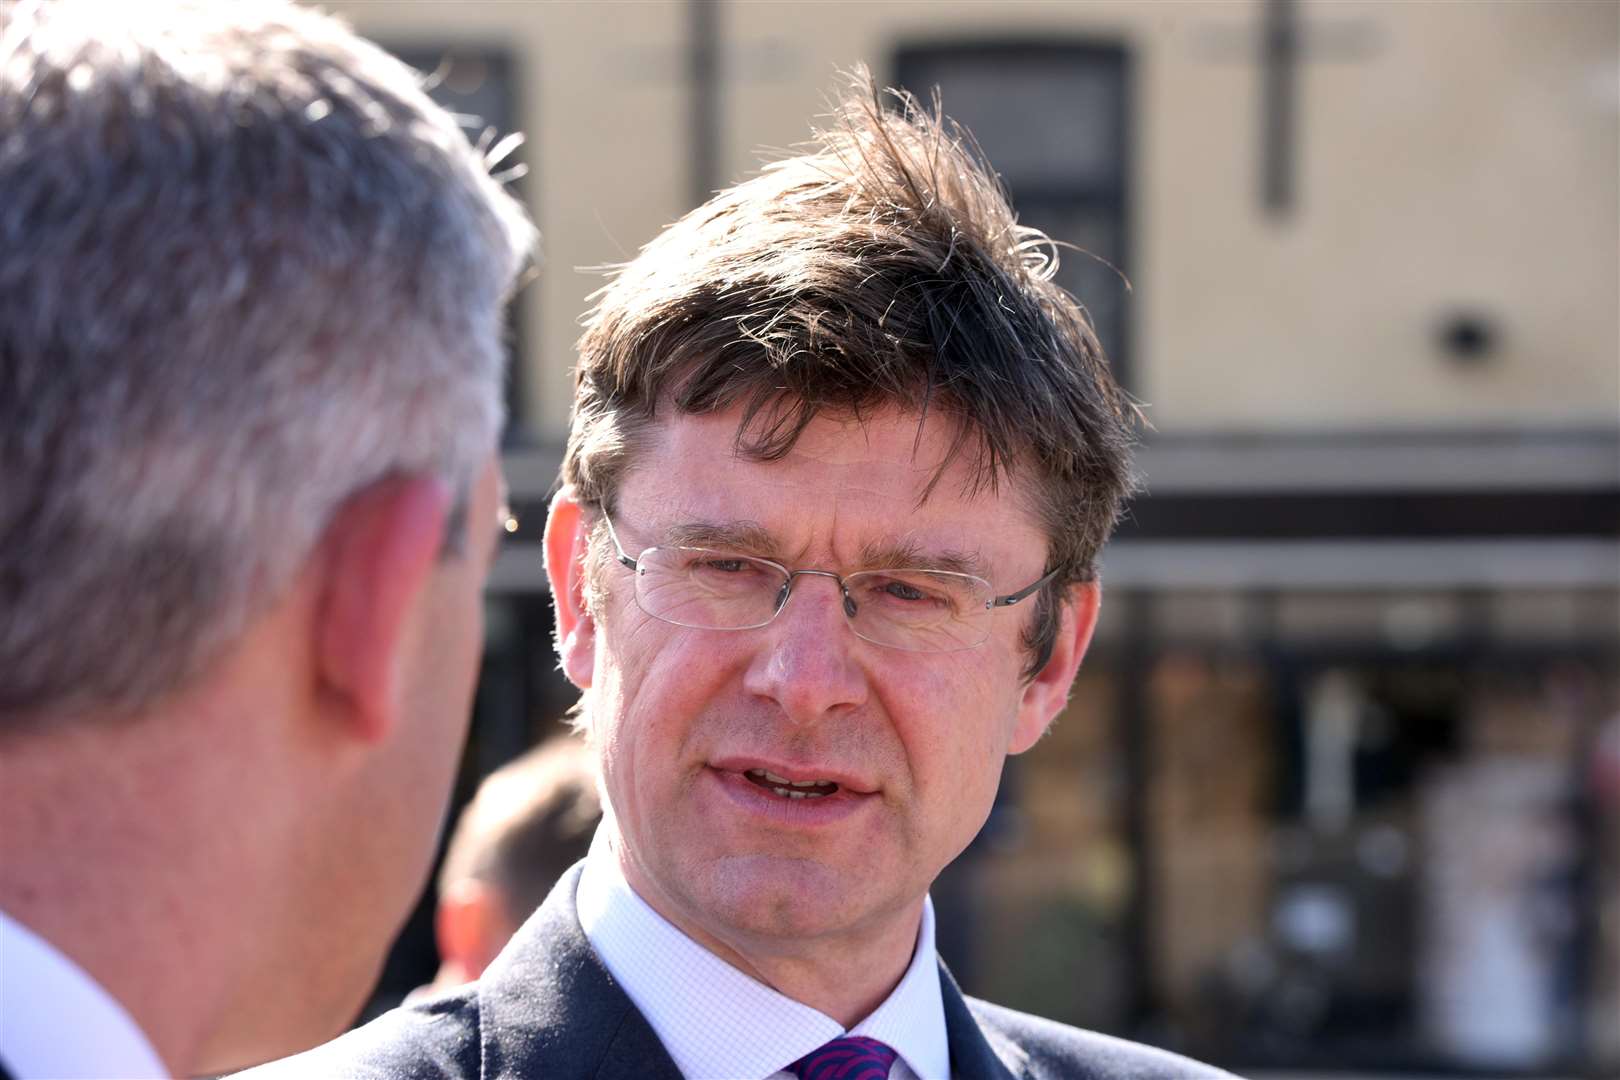 Tunbridge Wells MP Greg Clark accepted two tickets to the Chelsea Flower Show